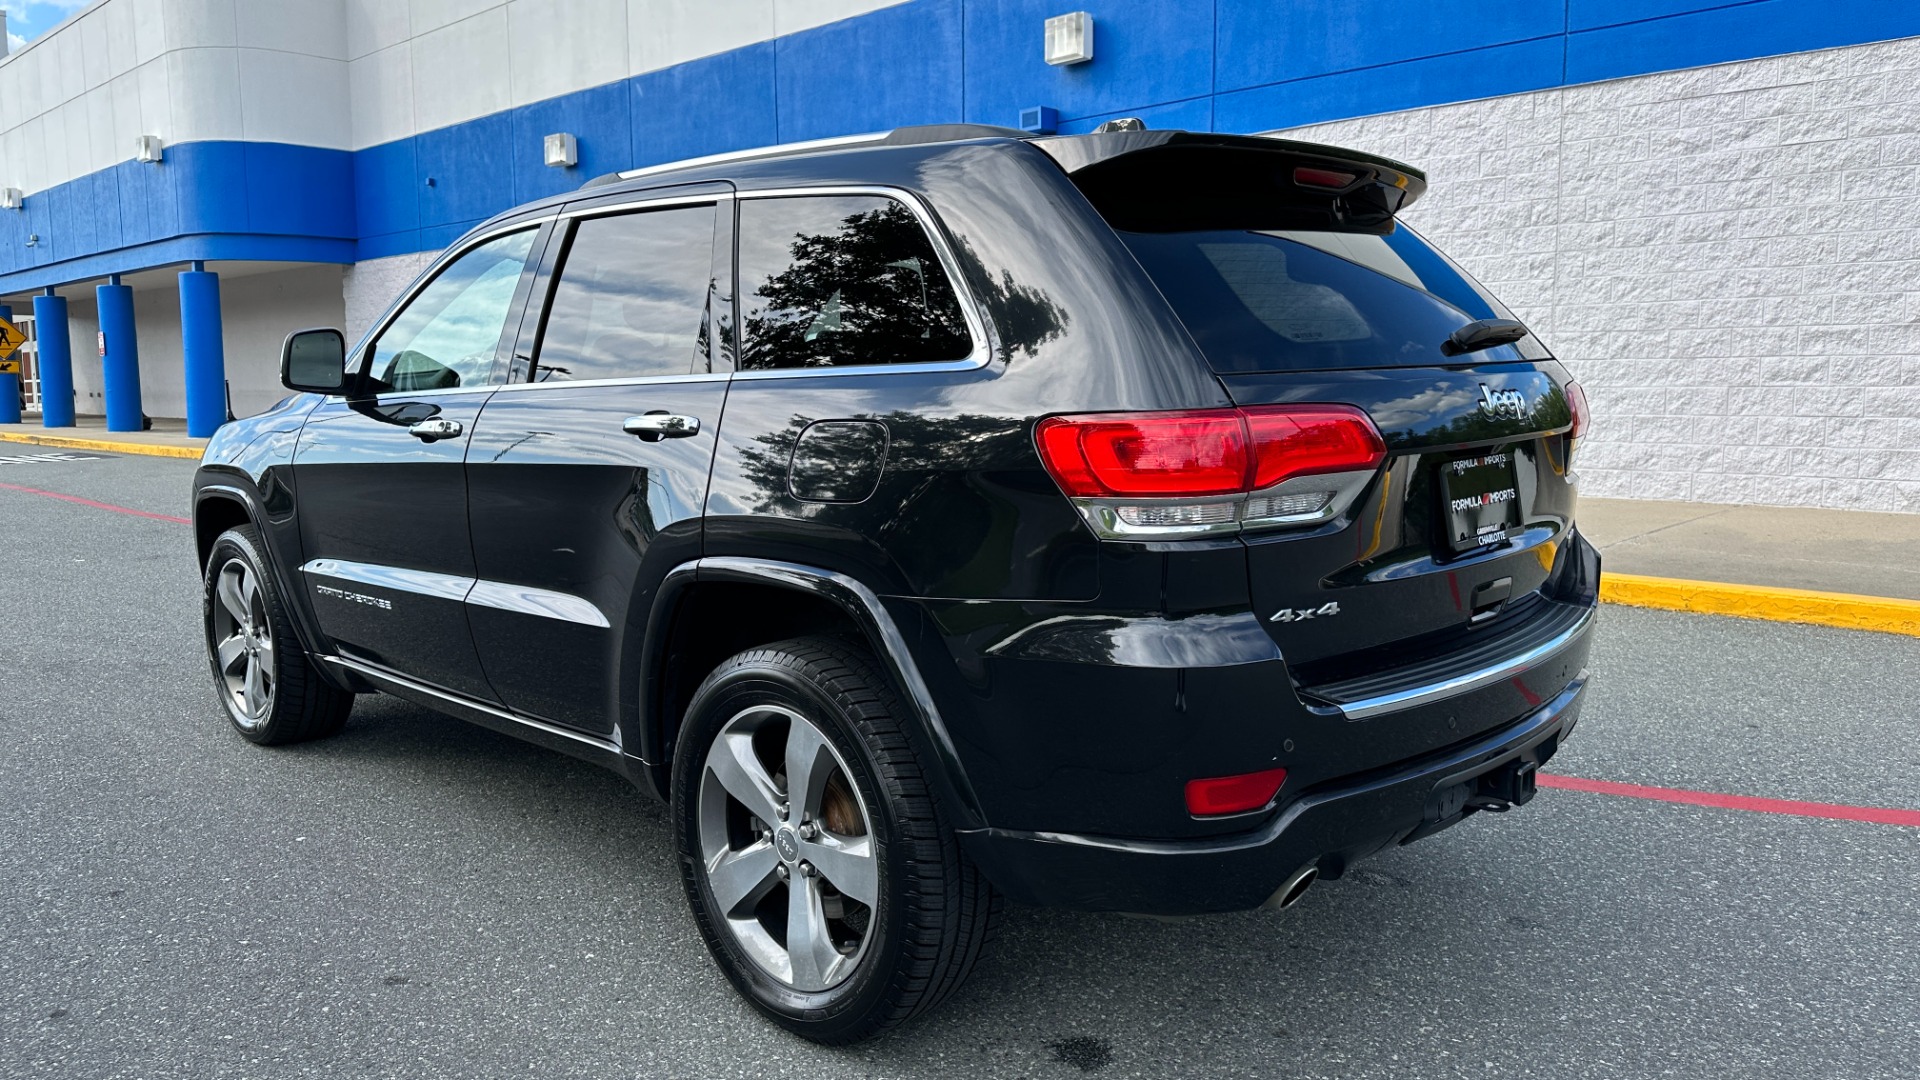 Used 2016 Jeep Grand Cherokee OVERLAND / 5.7L V8 ENGINE / 4WD / HARMAN KARDON for sale $24,495 at Formula Imports in Charlotte NC 28227 7